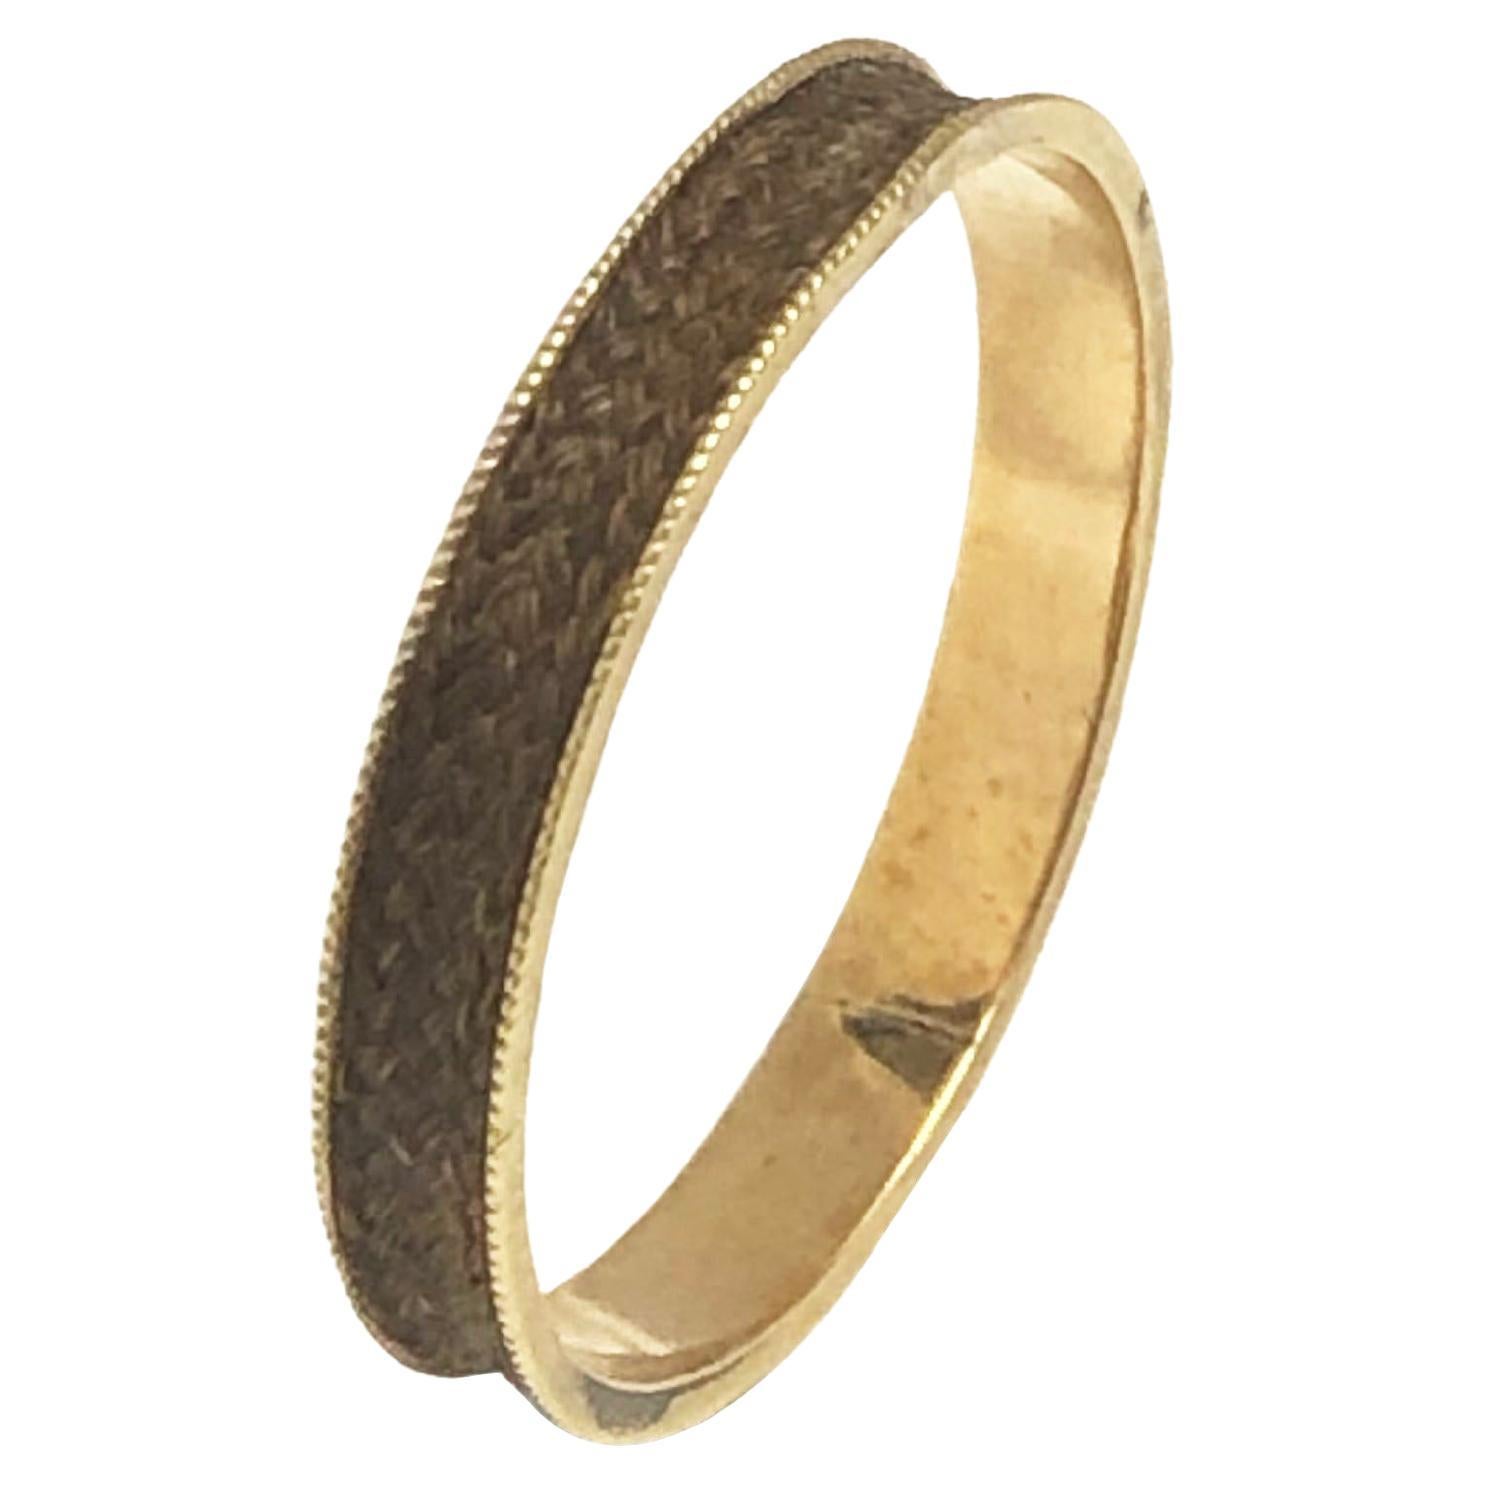 Mid Victorian Gold and Woven Hair Mourning Memorial Band Ring